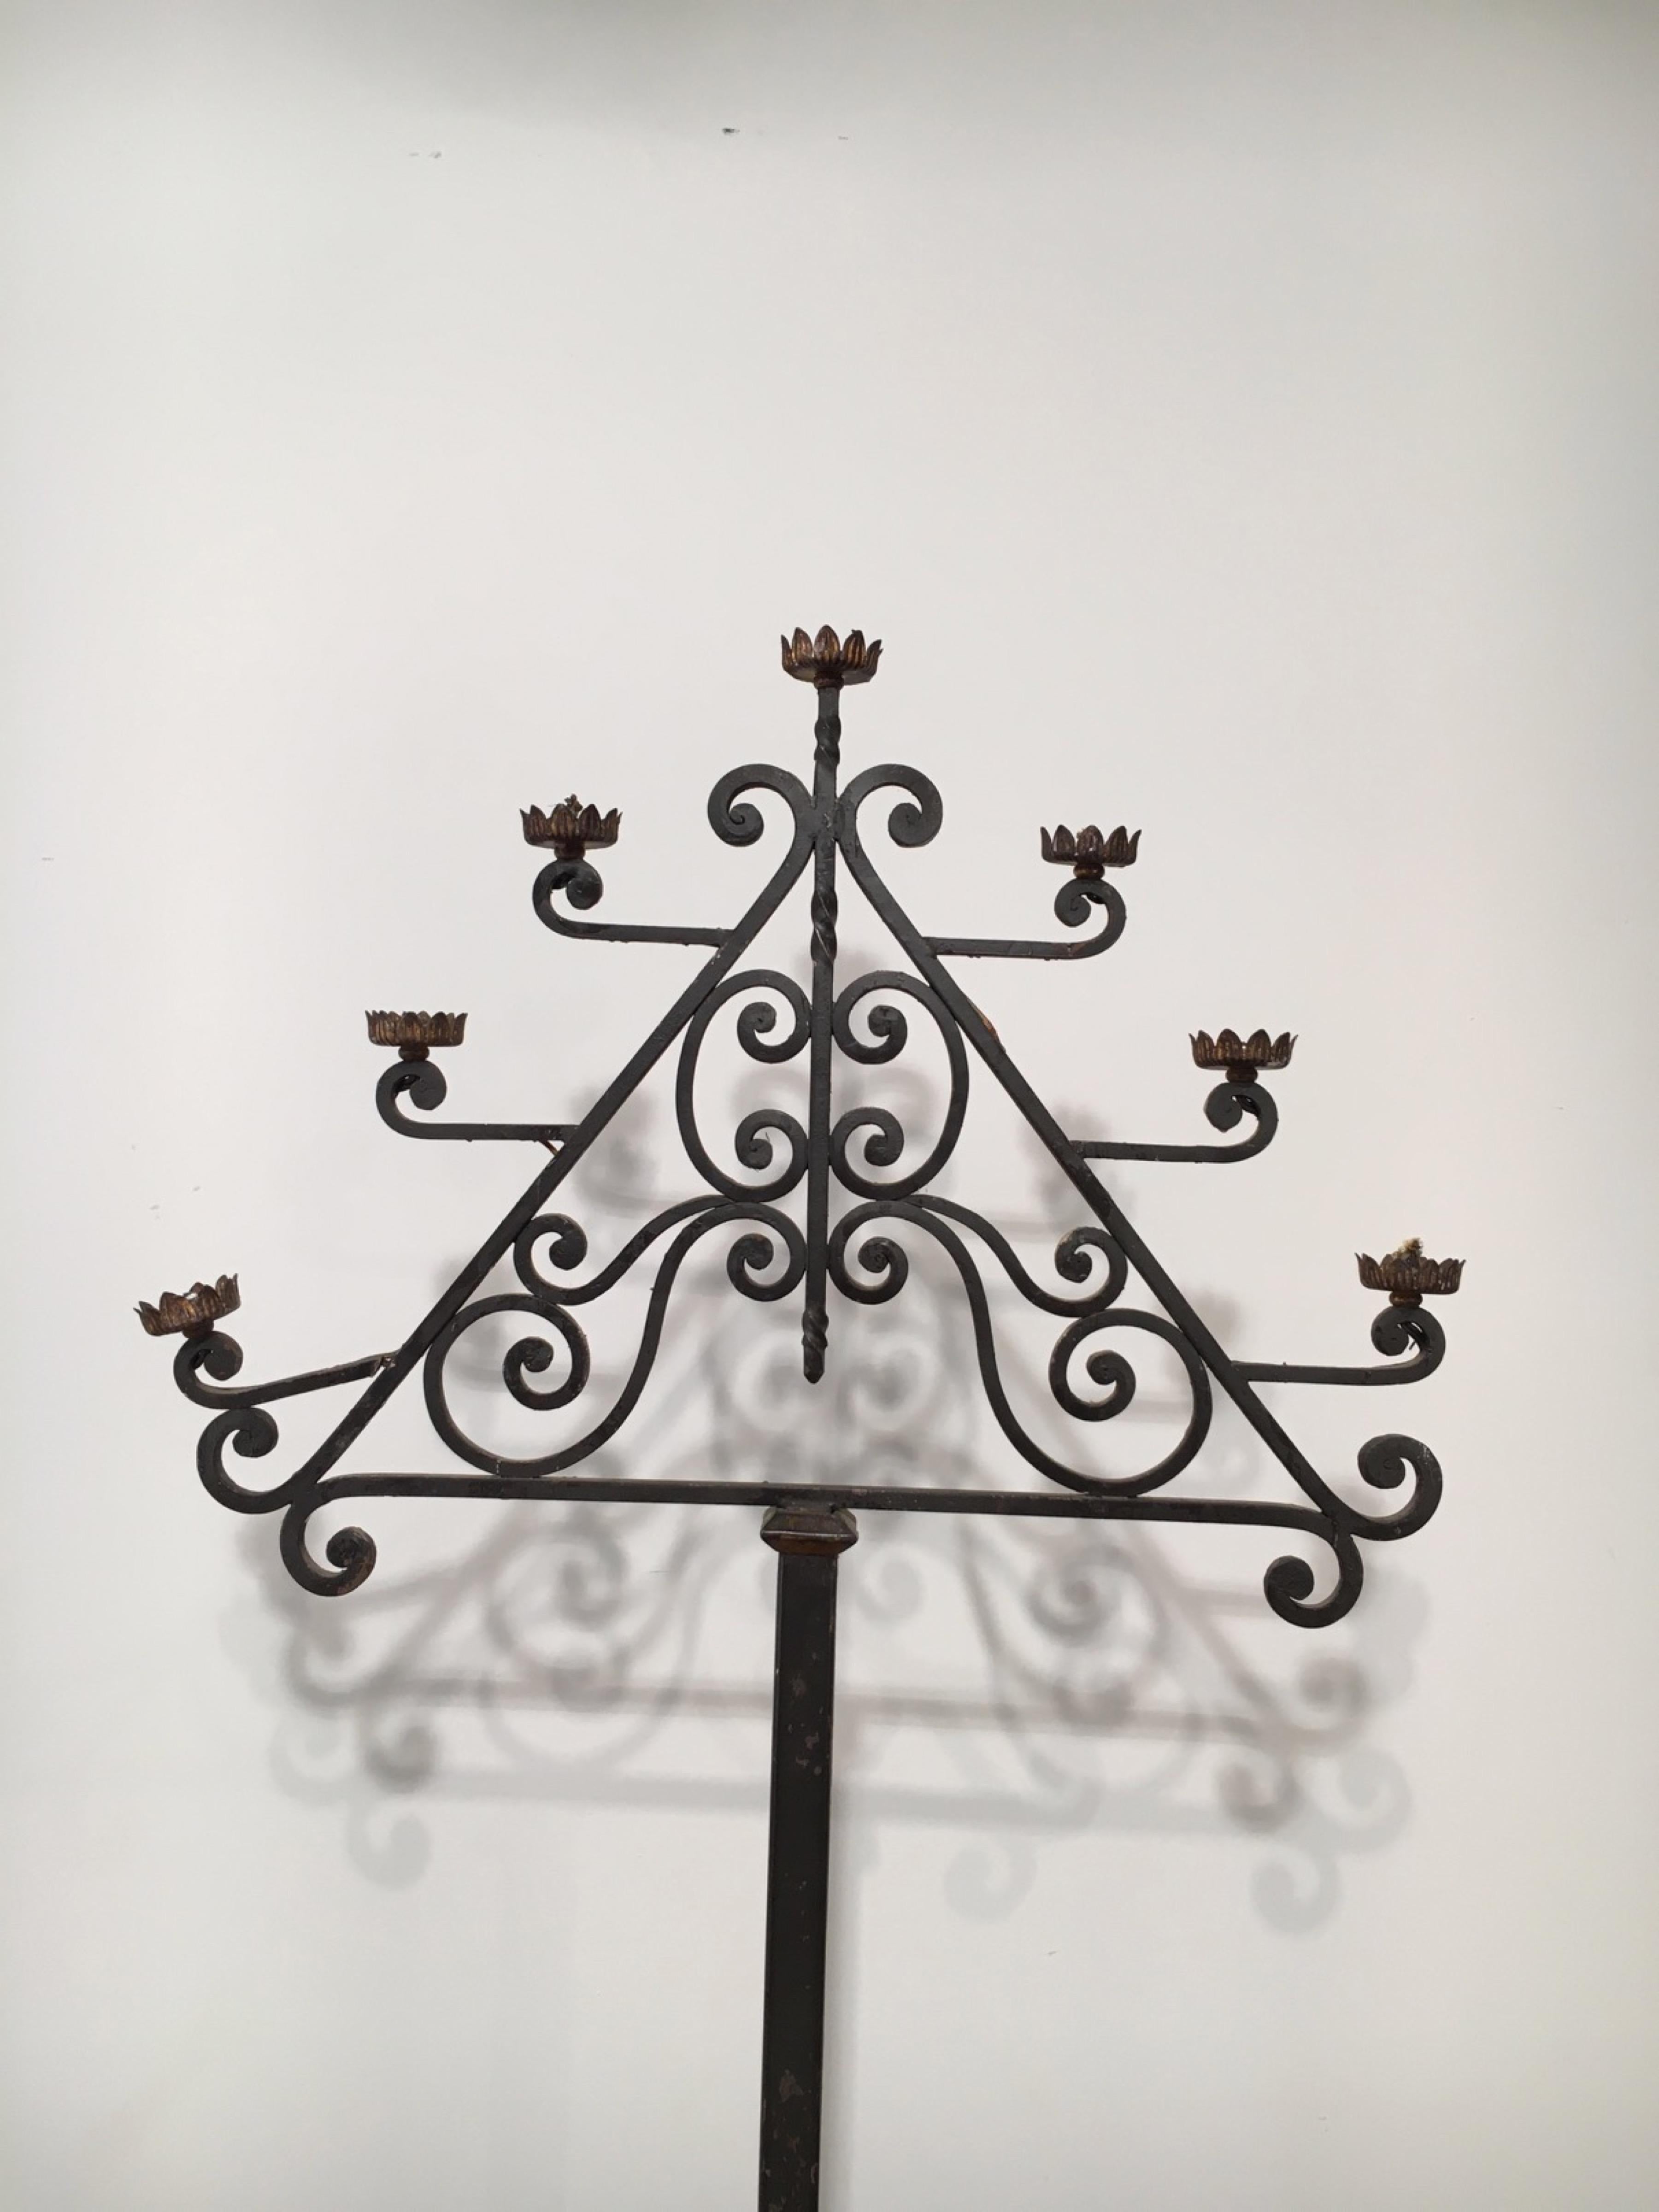 Wrought iron floor lamp with 7 lights. French. Circa 1940.